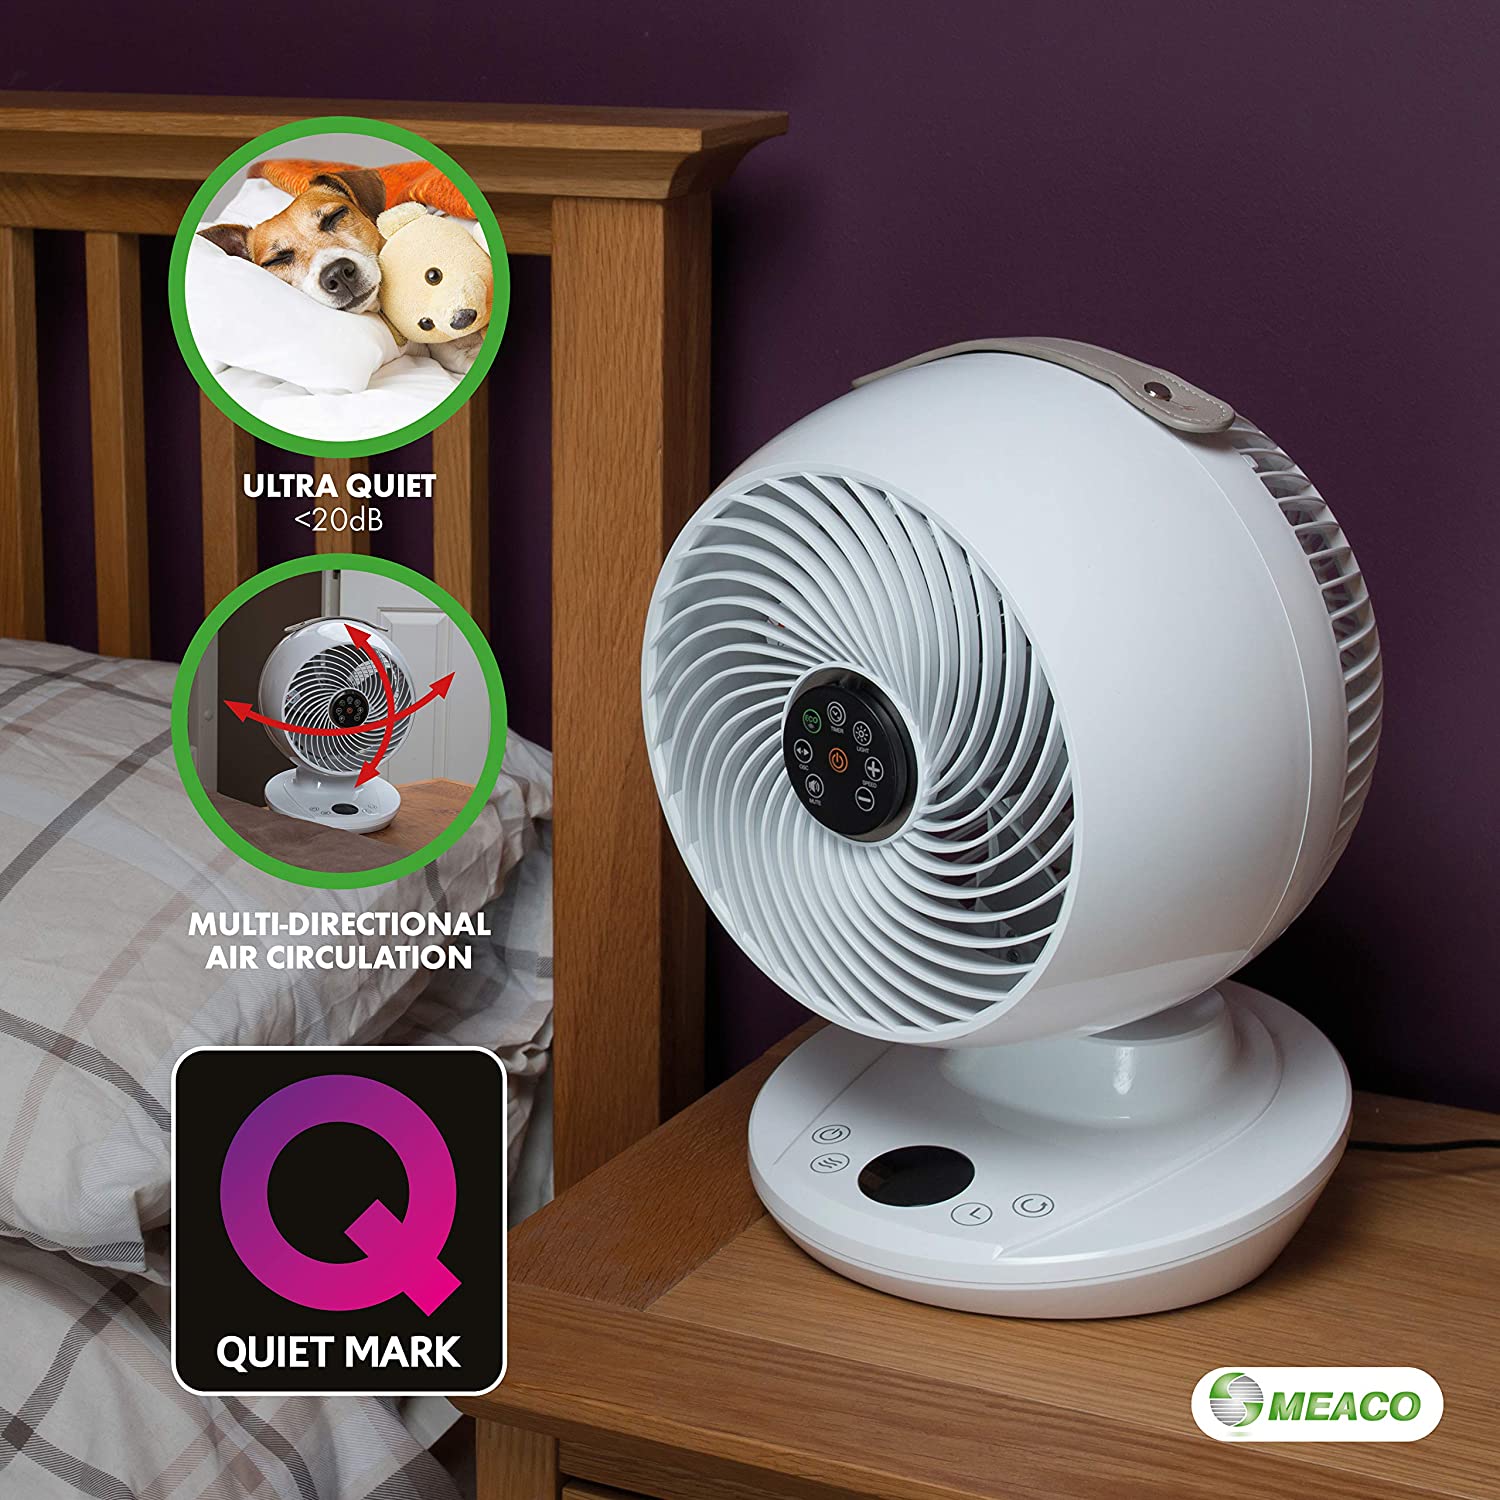 Meaco MeacoFan 650 Personal Air Circulator cooling fan, ultra-quiet, energy efficient- White (Energy Class A)